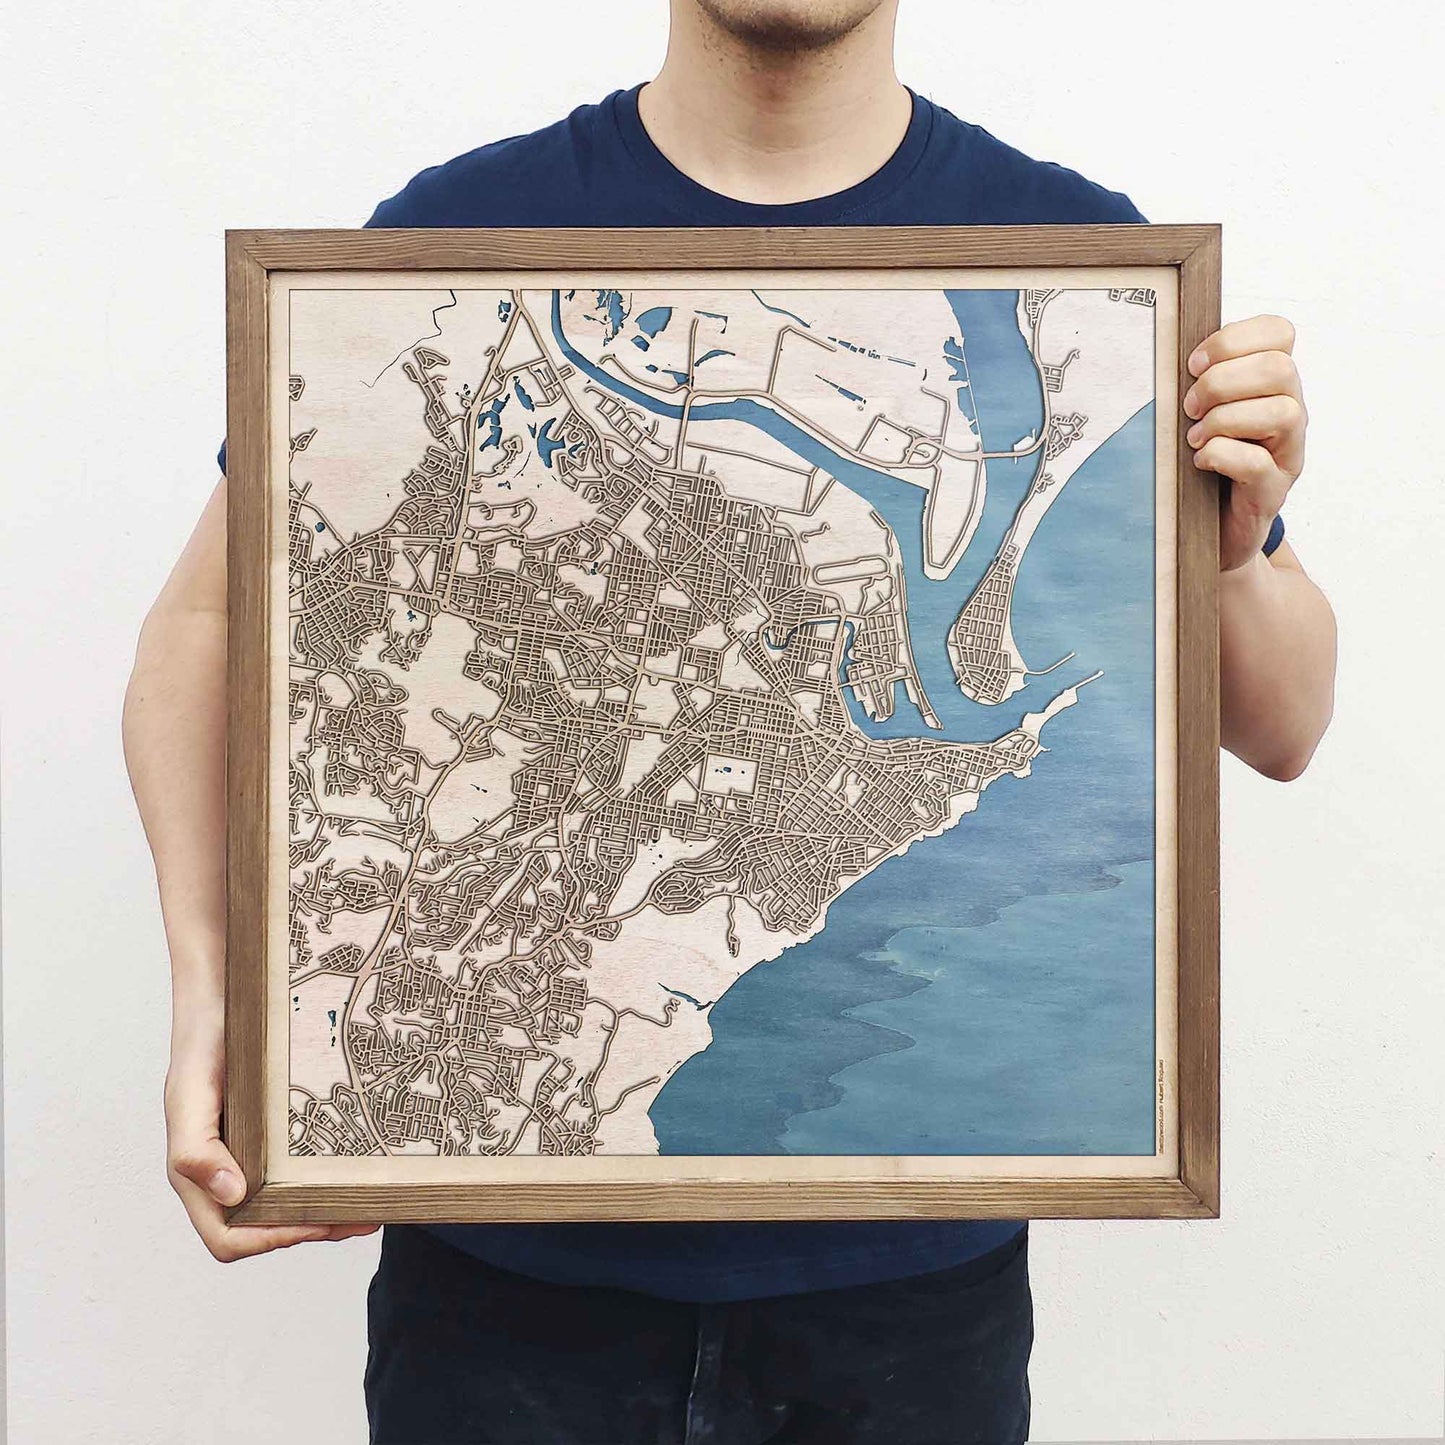 Newcastle Wooden Map by CityWood - Custom Wood Map Art - Unique Laser Cut Engraved - Anniversary Gift